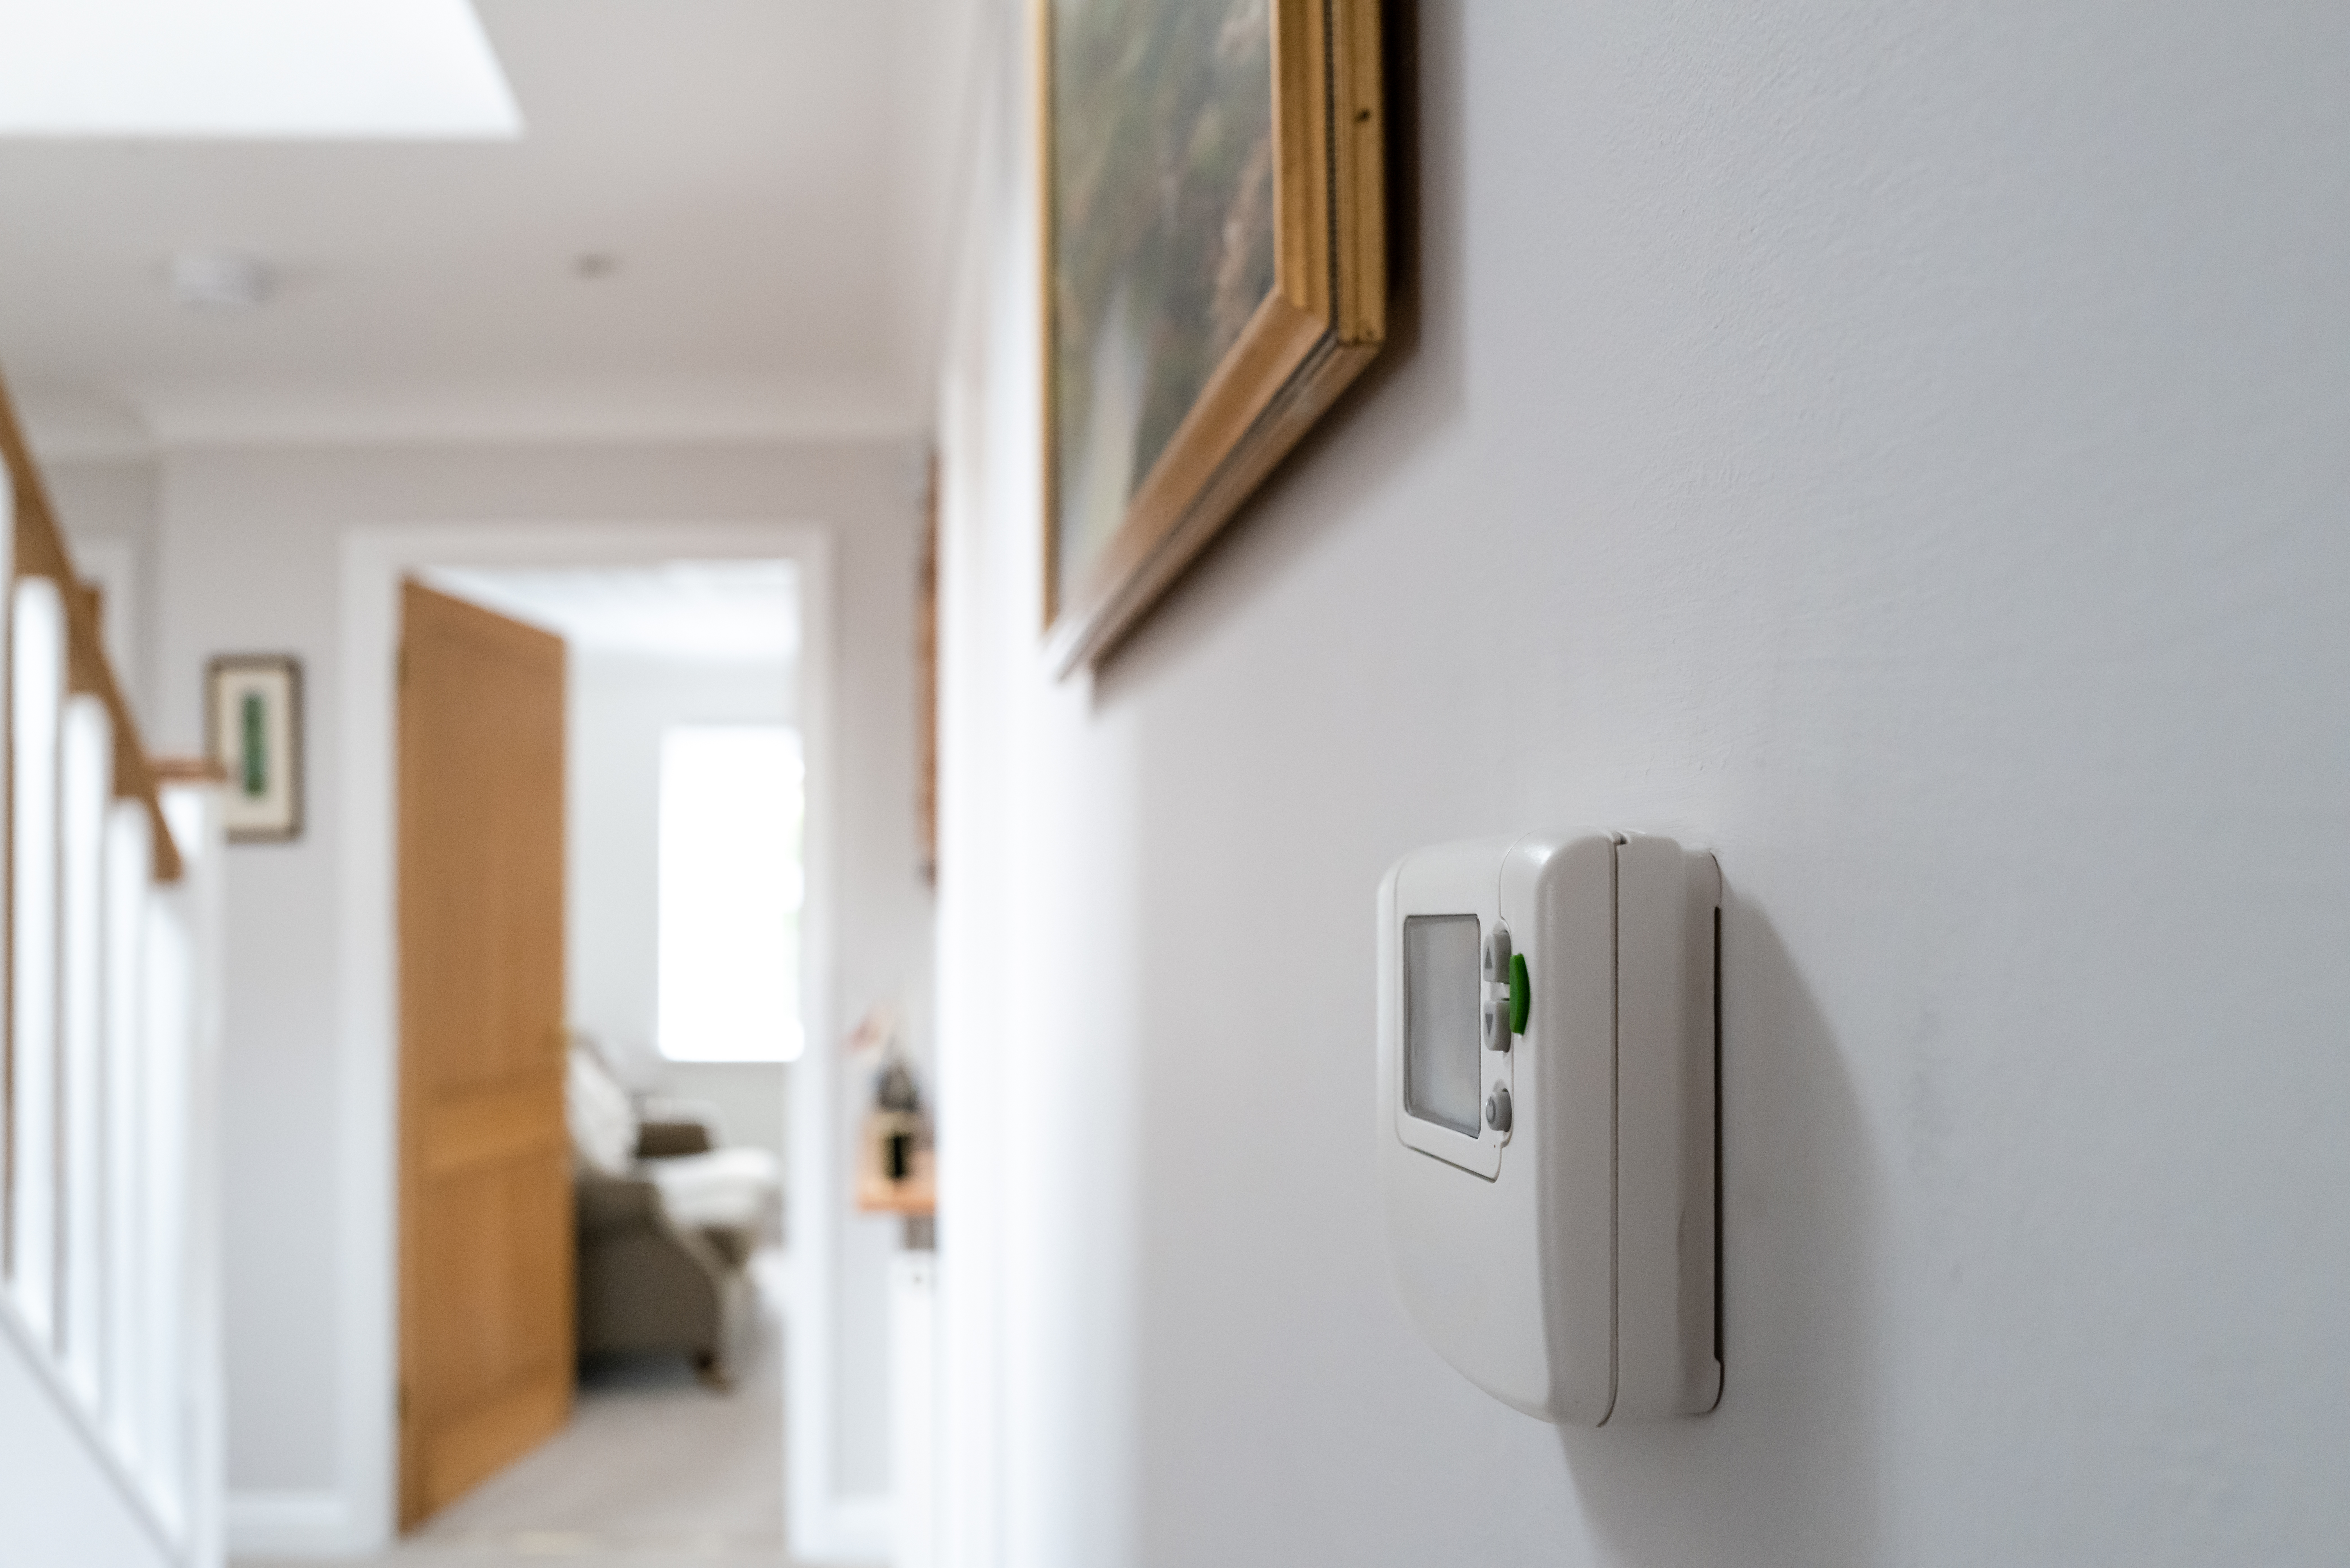 Tips for Choosing the Right Home Thermostat